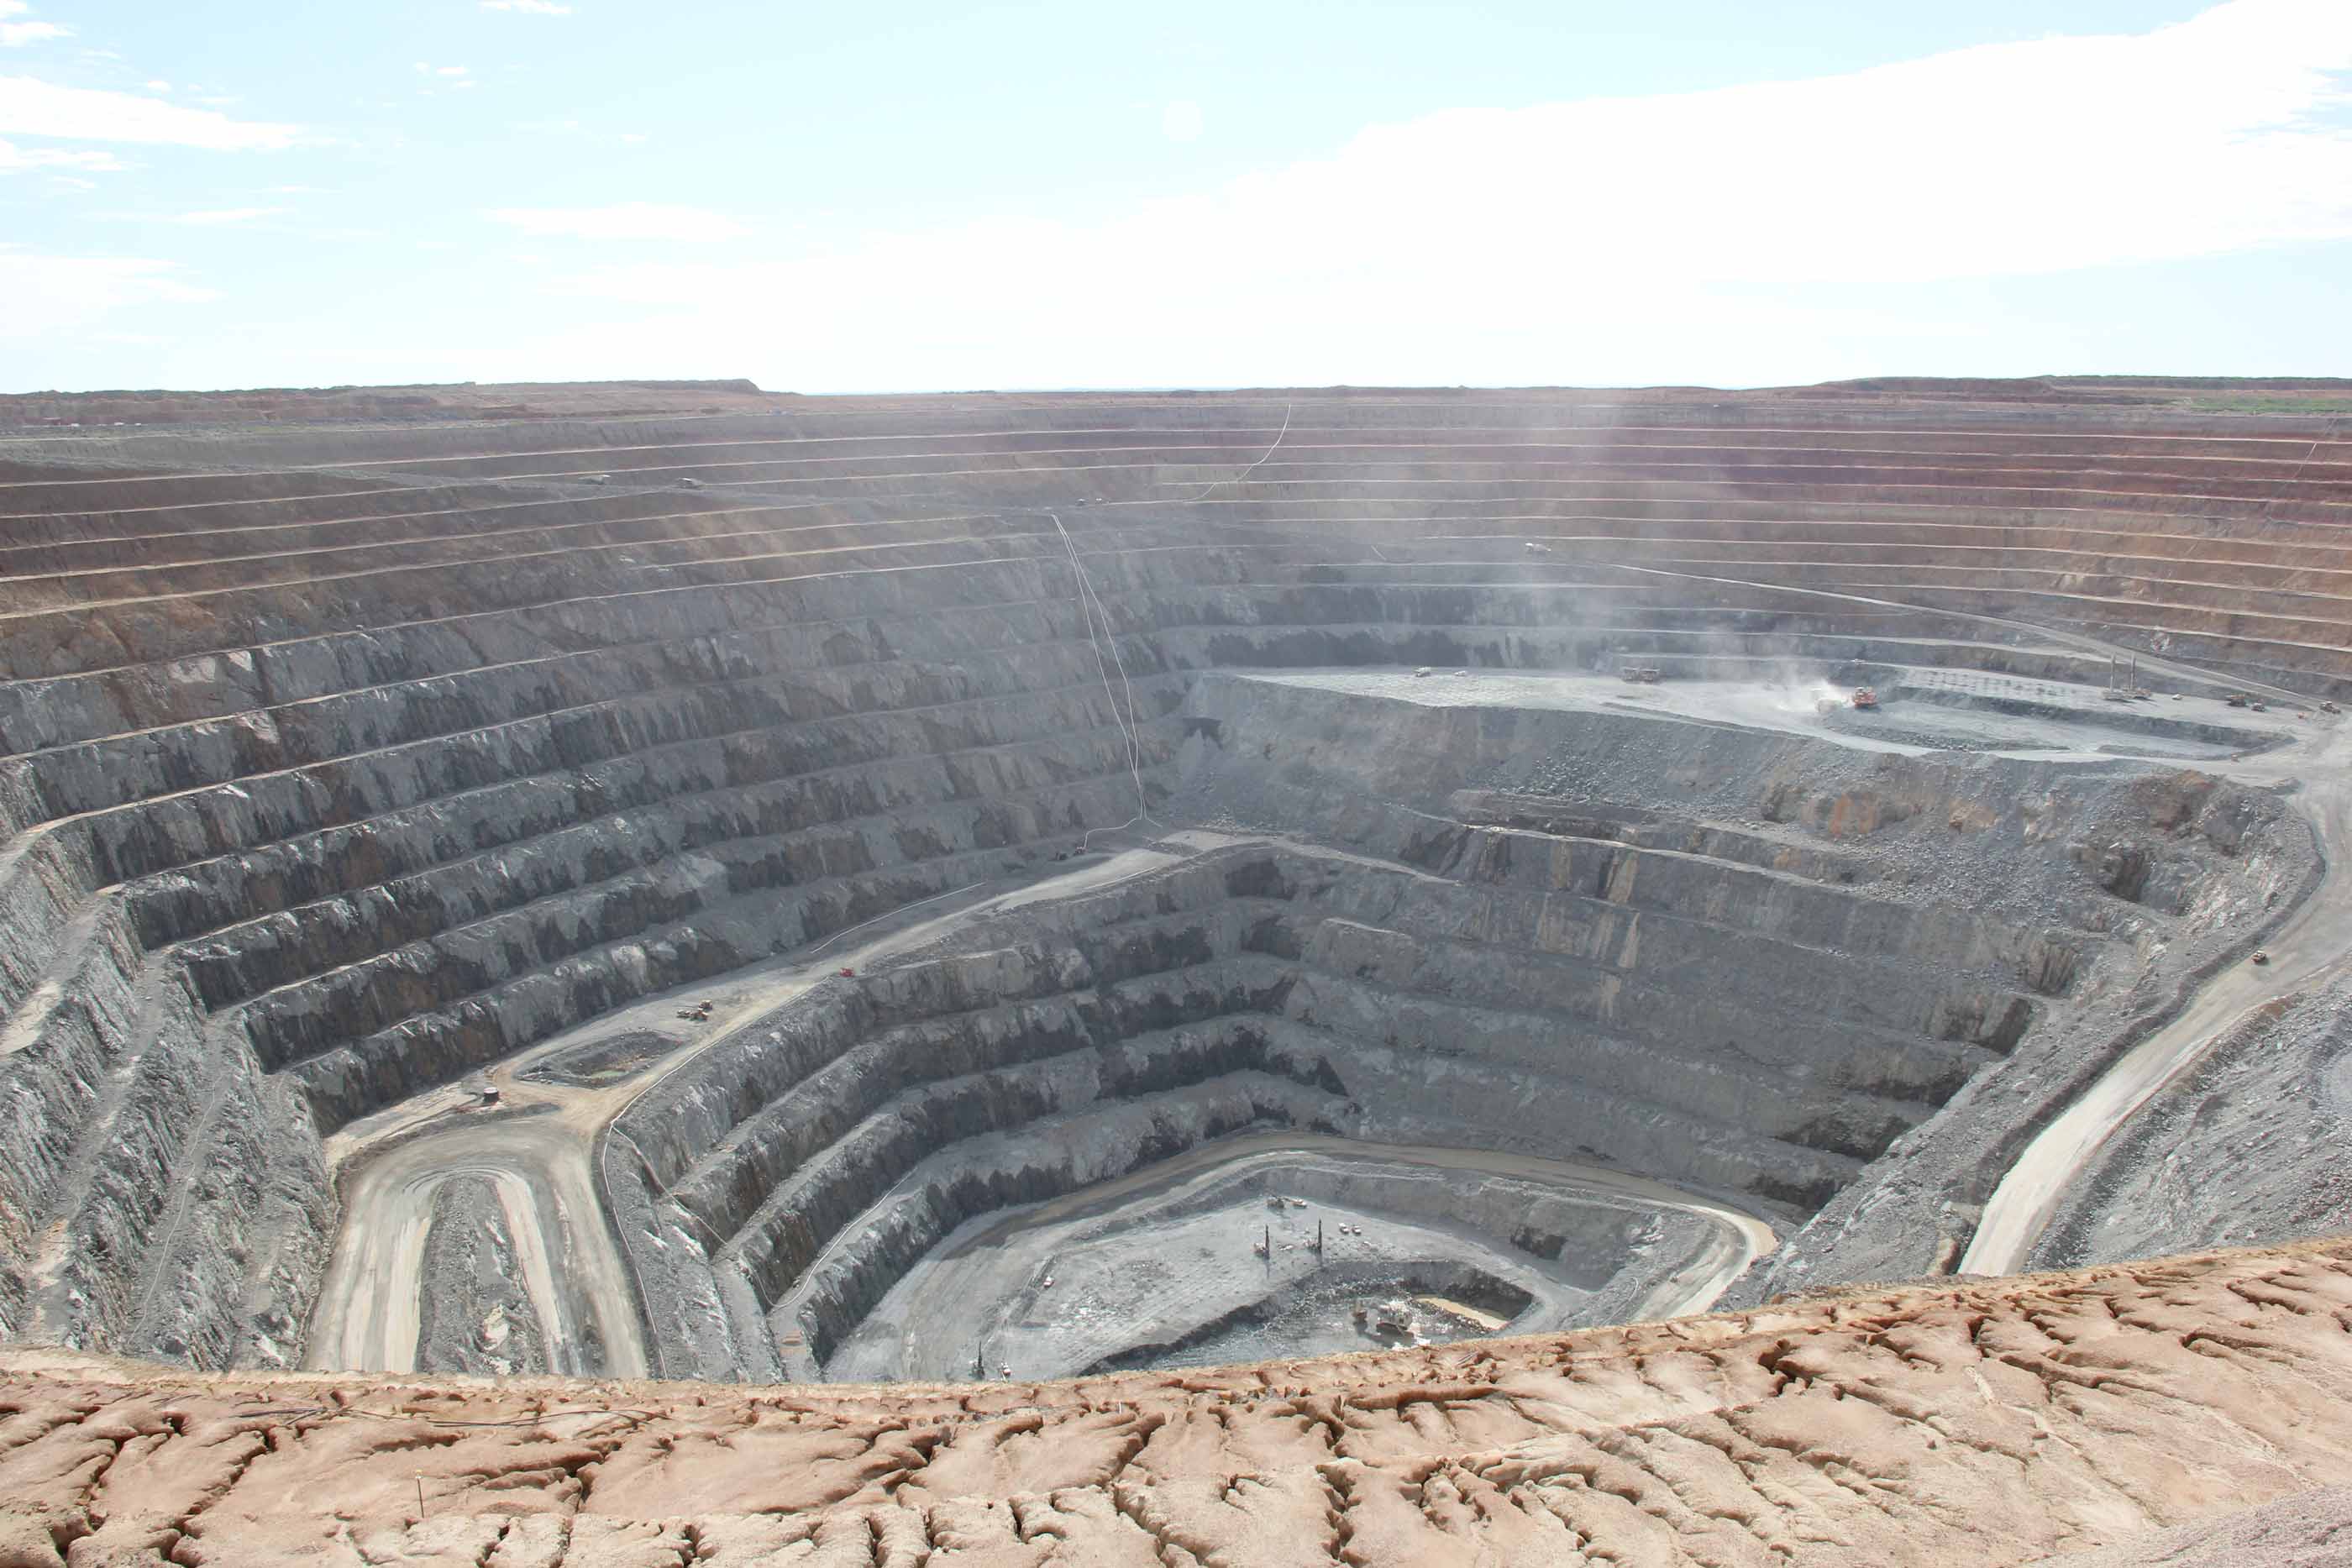 Our wear protection systems for mining buckets provide maximum relability and productivity for the mines.